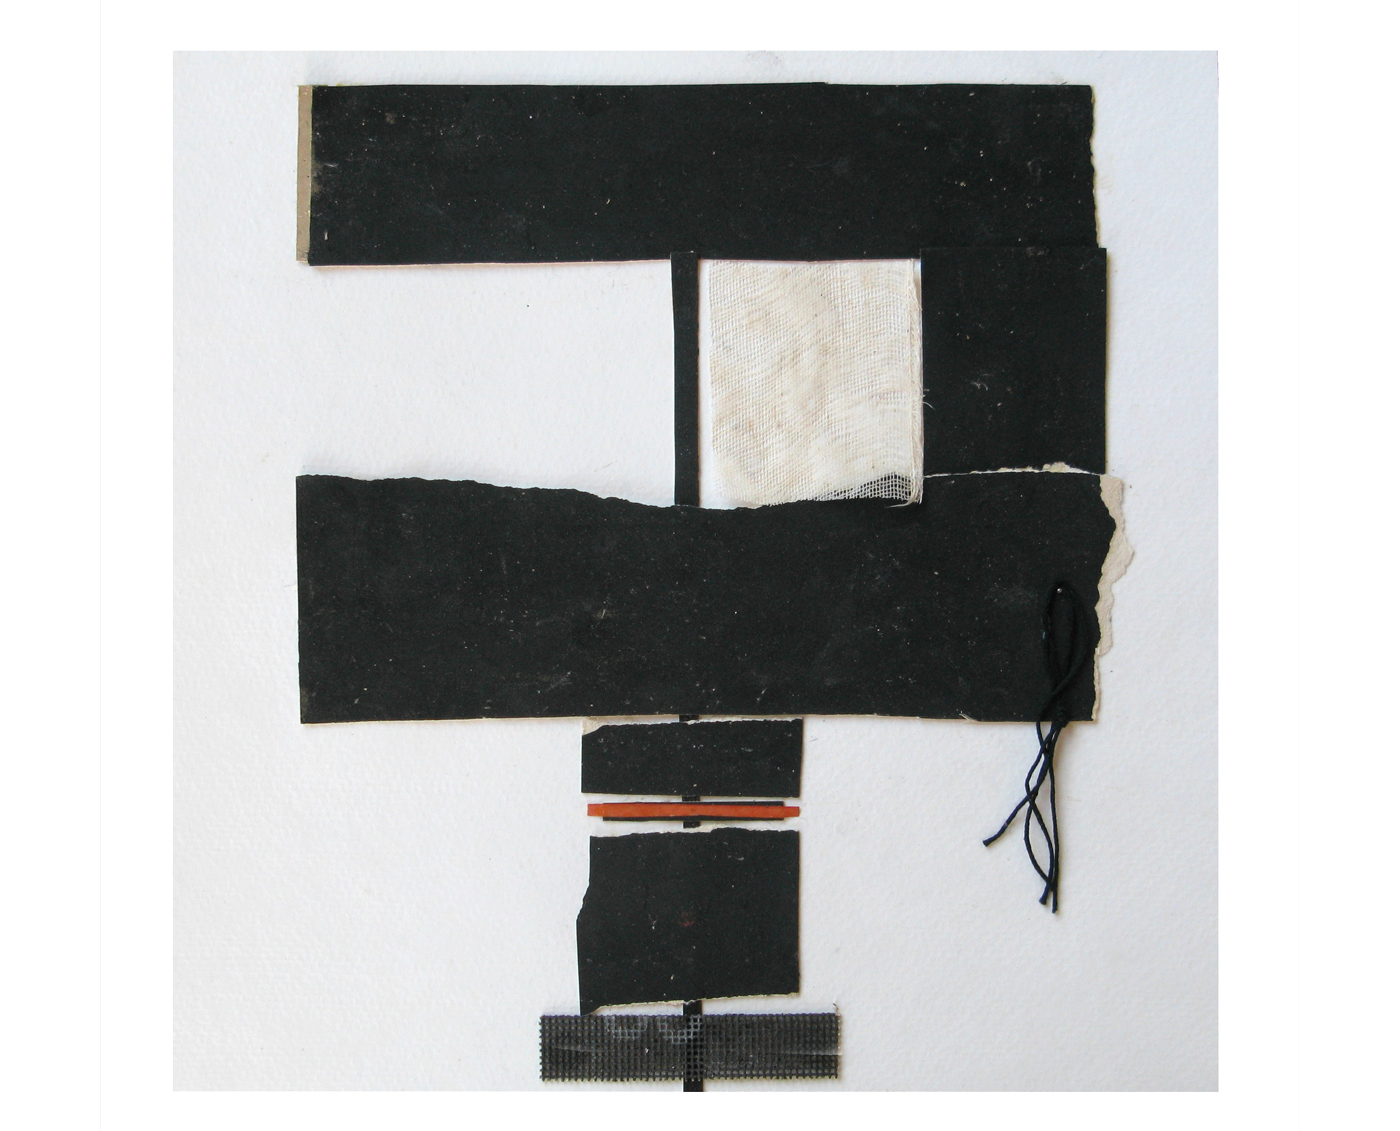 UNTITLED (TR629), 2015 mixed media on paper, 12 x 12 inches